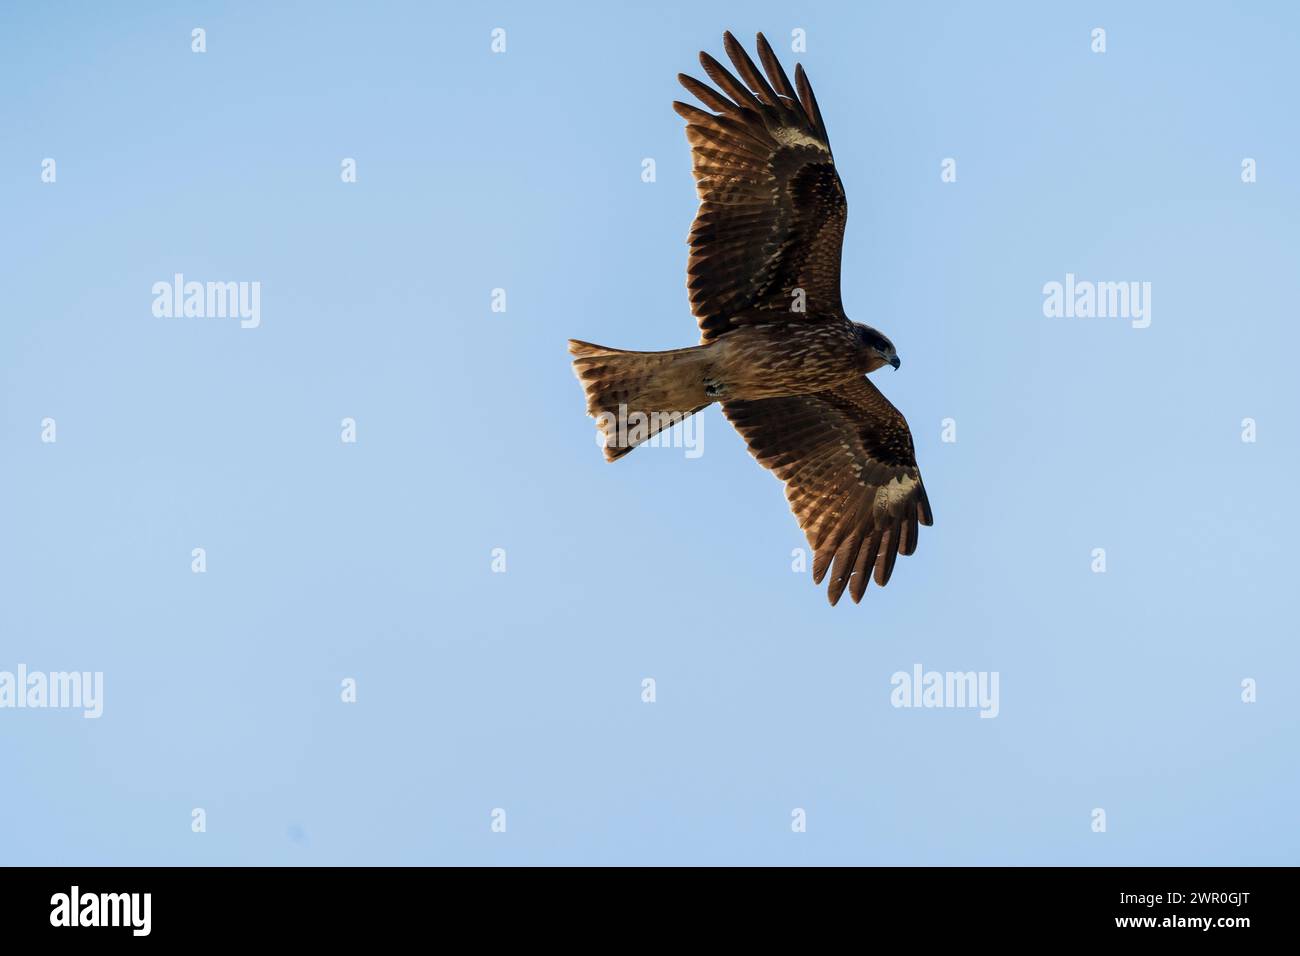 Black eared Kite, Milvus Lineatus, (sometimes called black kite), soaring in the blue sky during the warm springtime at Akashi in Japan. Stock Photo